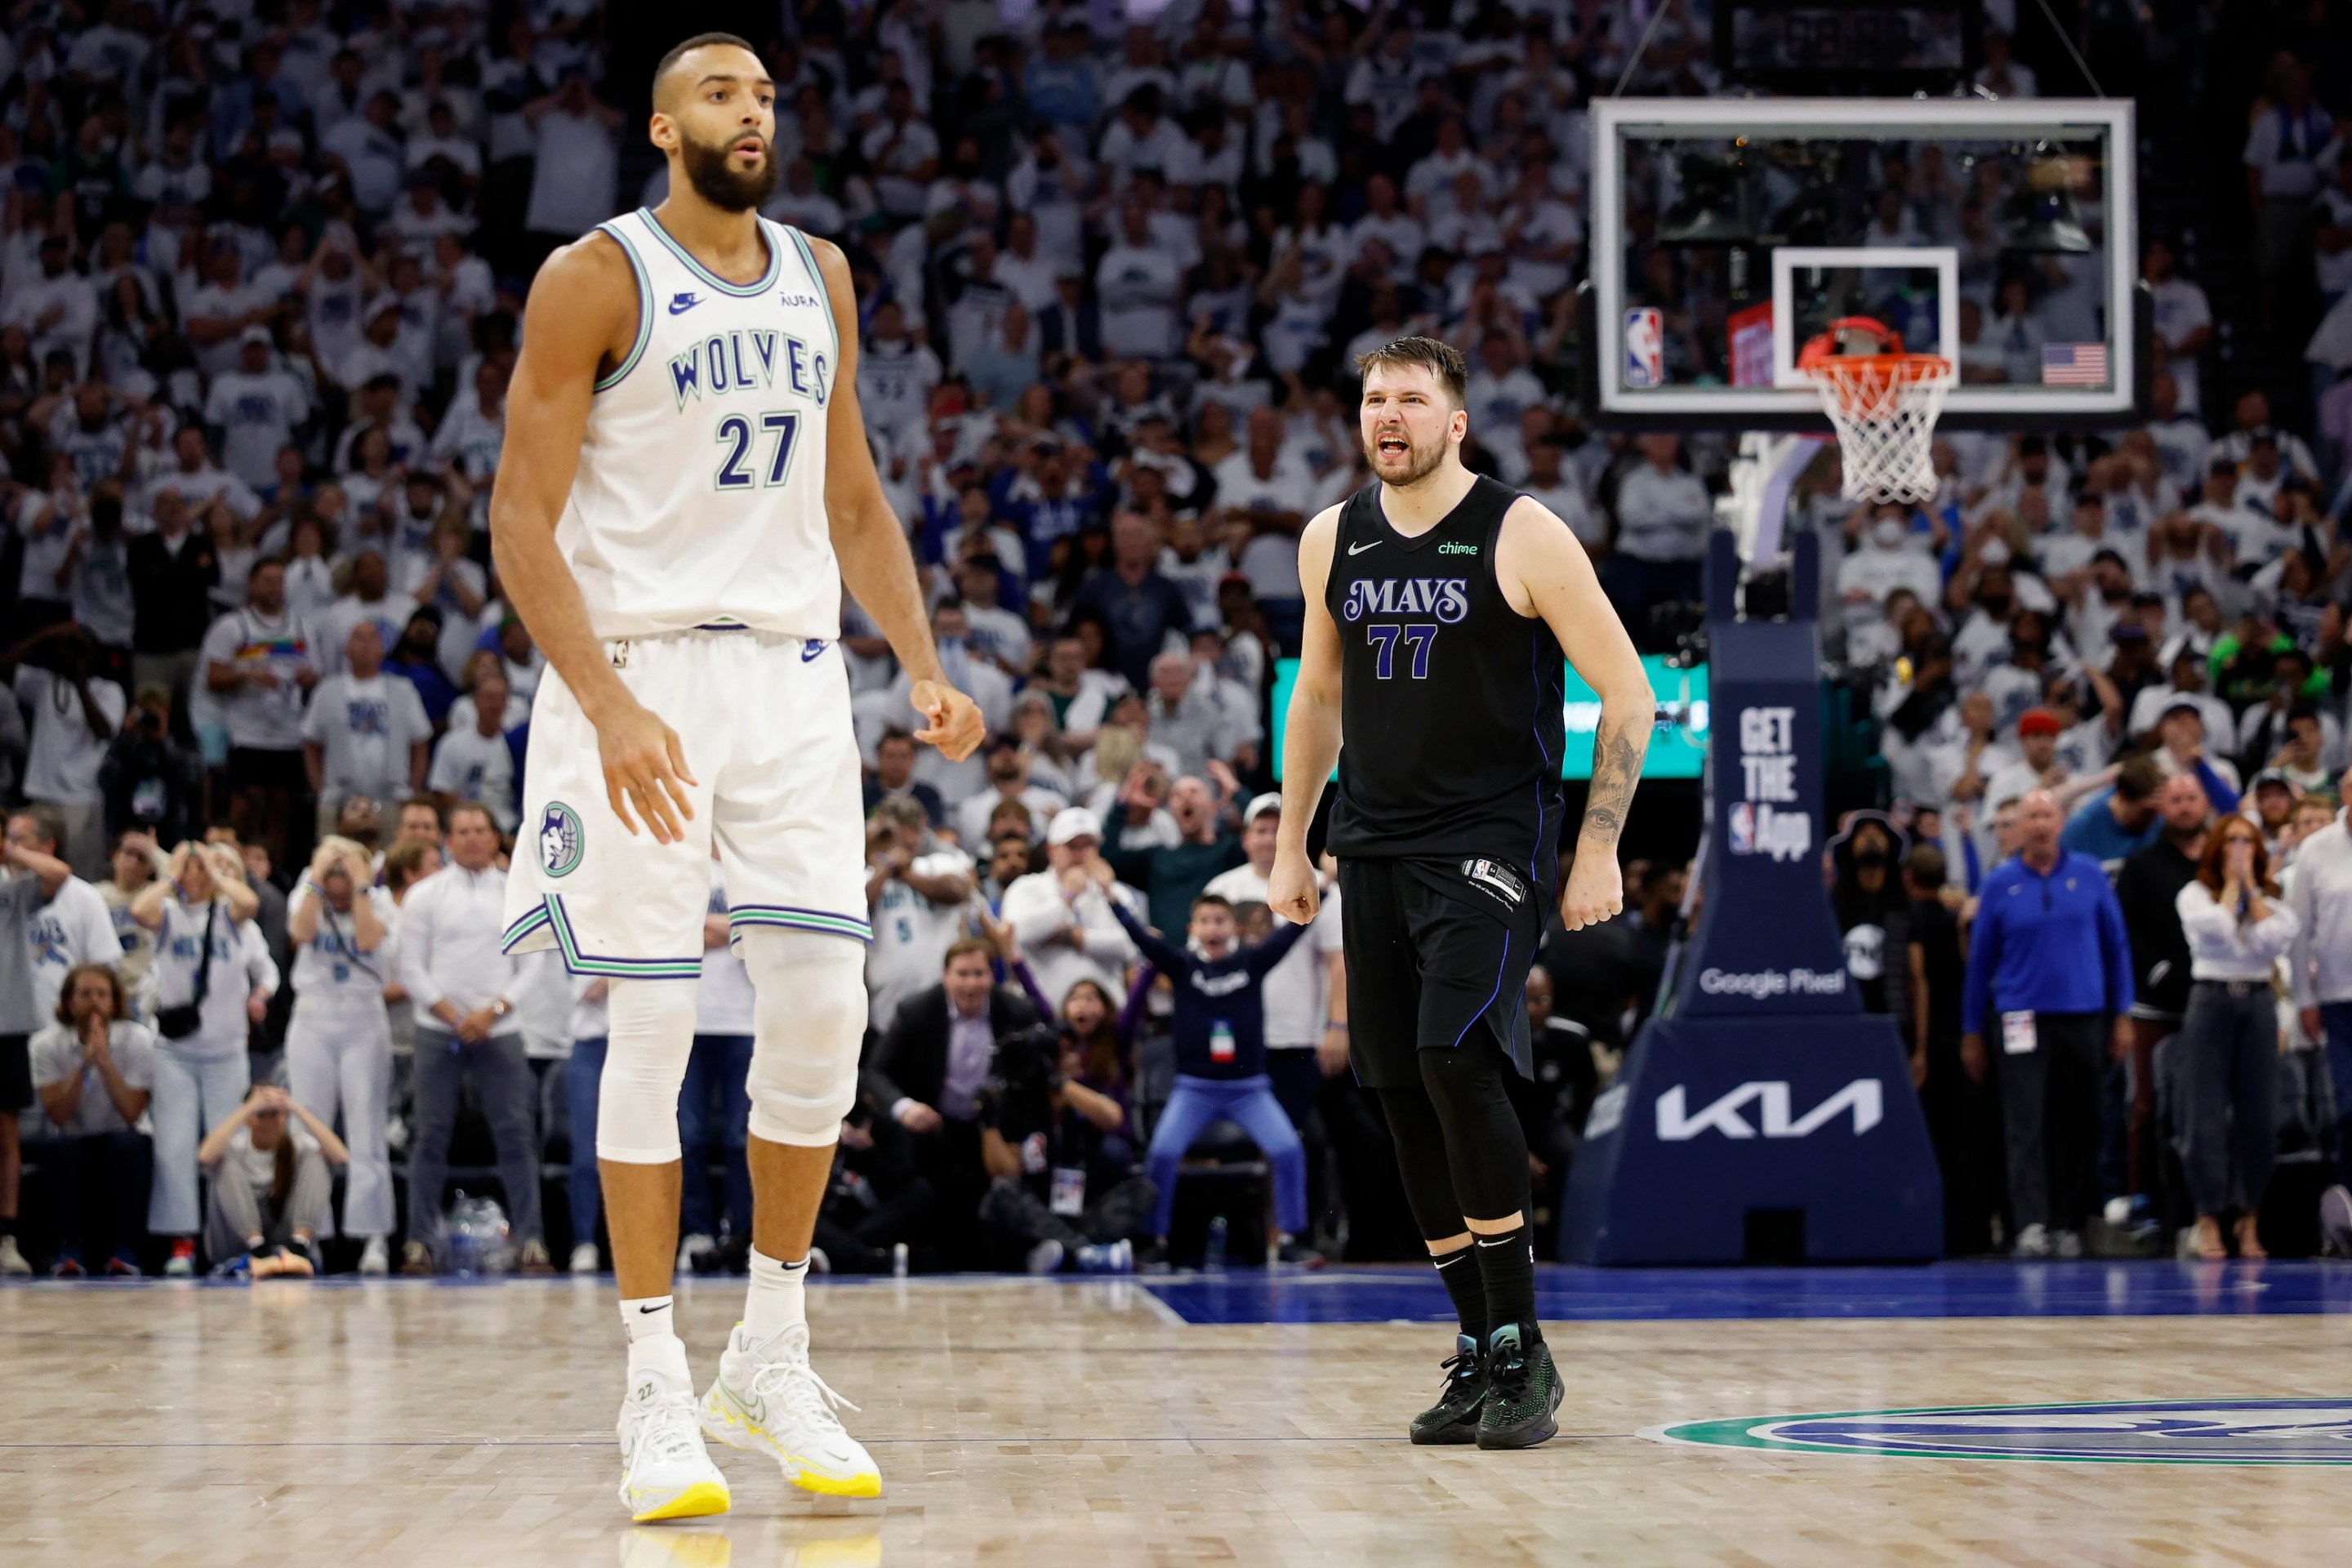 Luka Doncic exults/leers in the direction of Minnesota center Rudy Gobert after hitting the game three-pointer over him in Game 2 of the Western Conference Finals. Luka's really wet-looking.